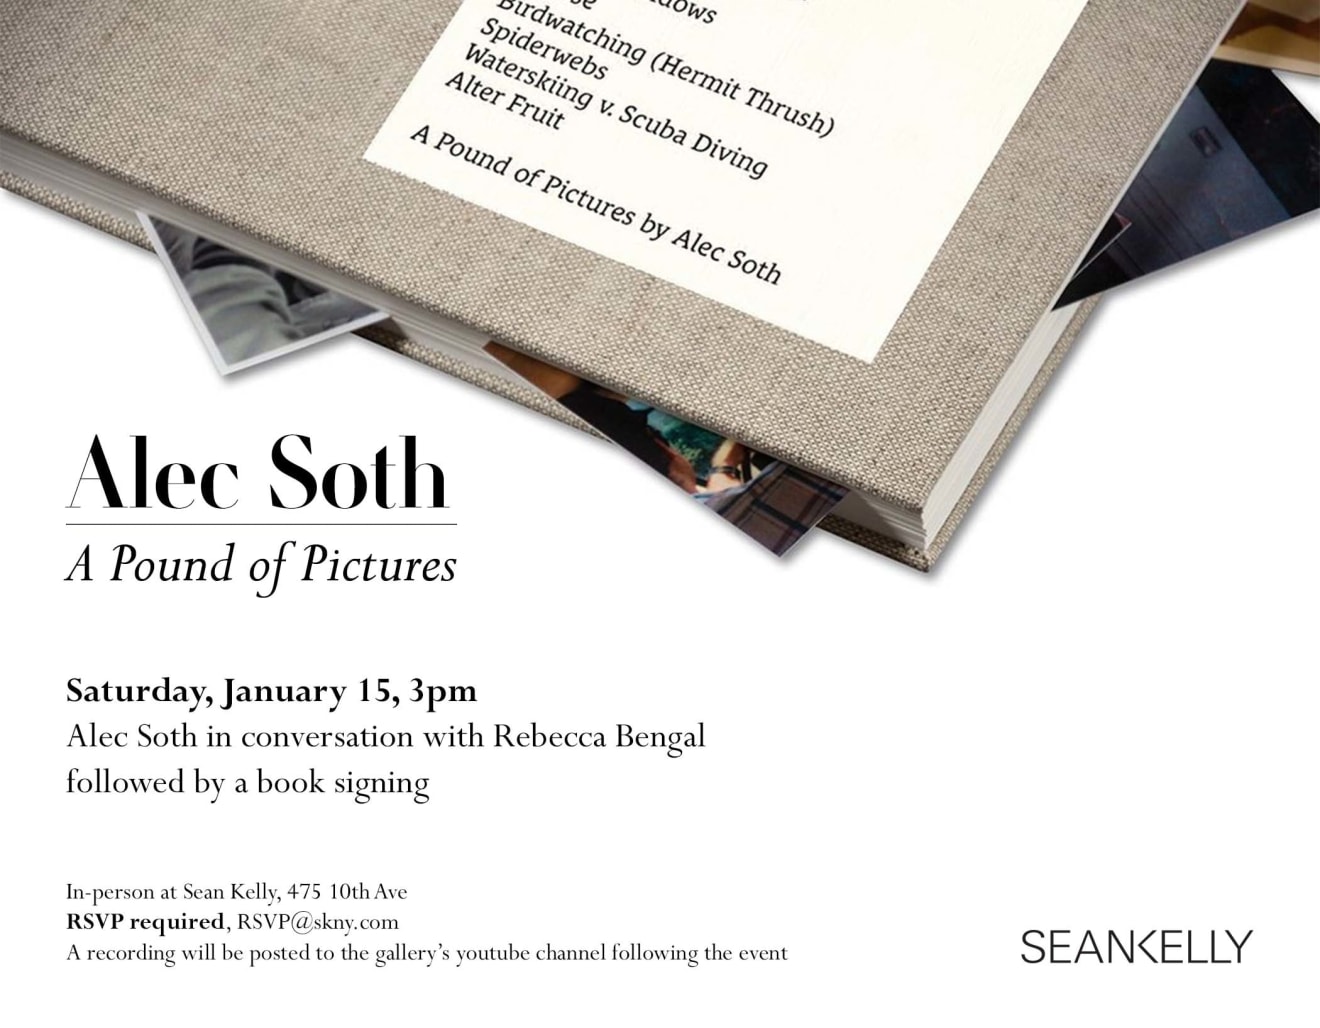 Alec Soth in conversation with Rebecca Bengal